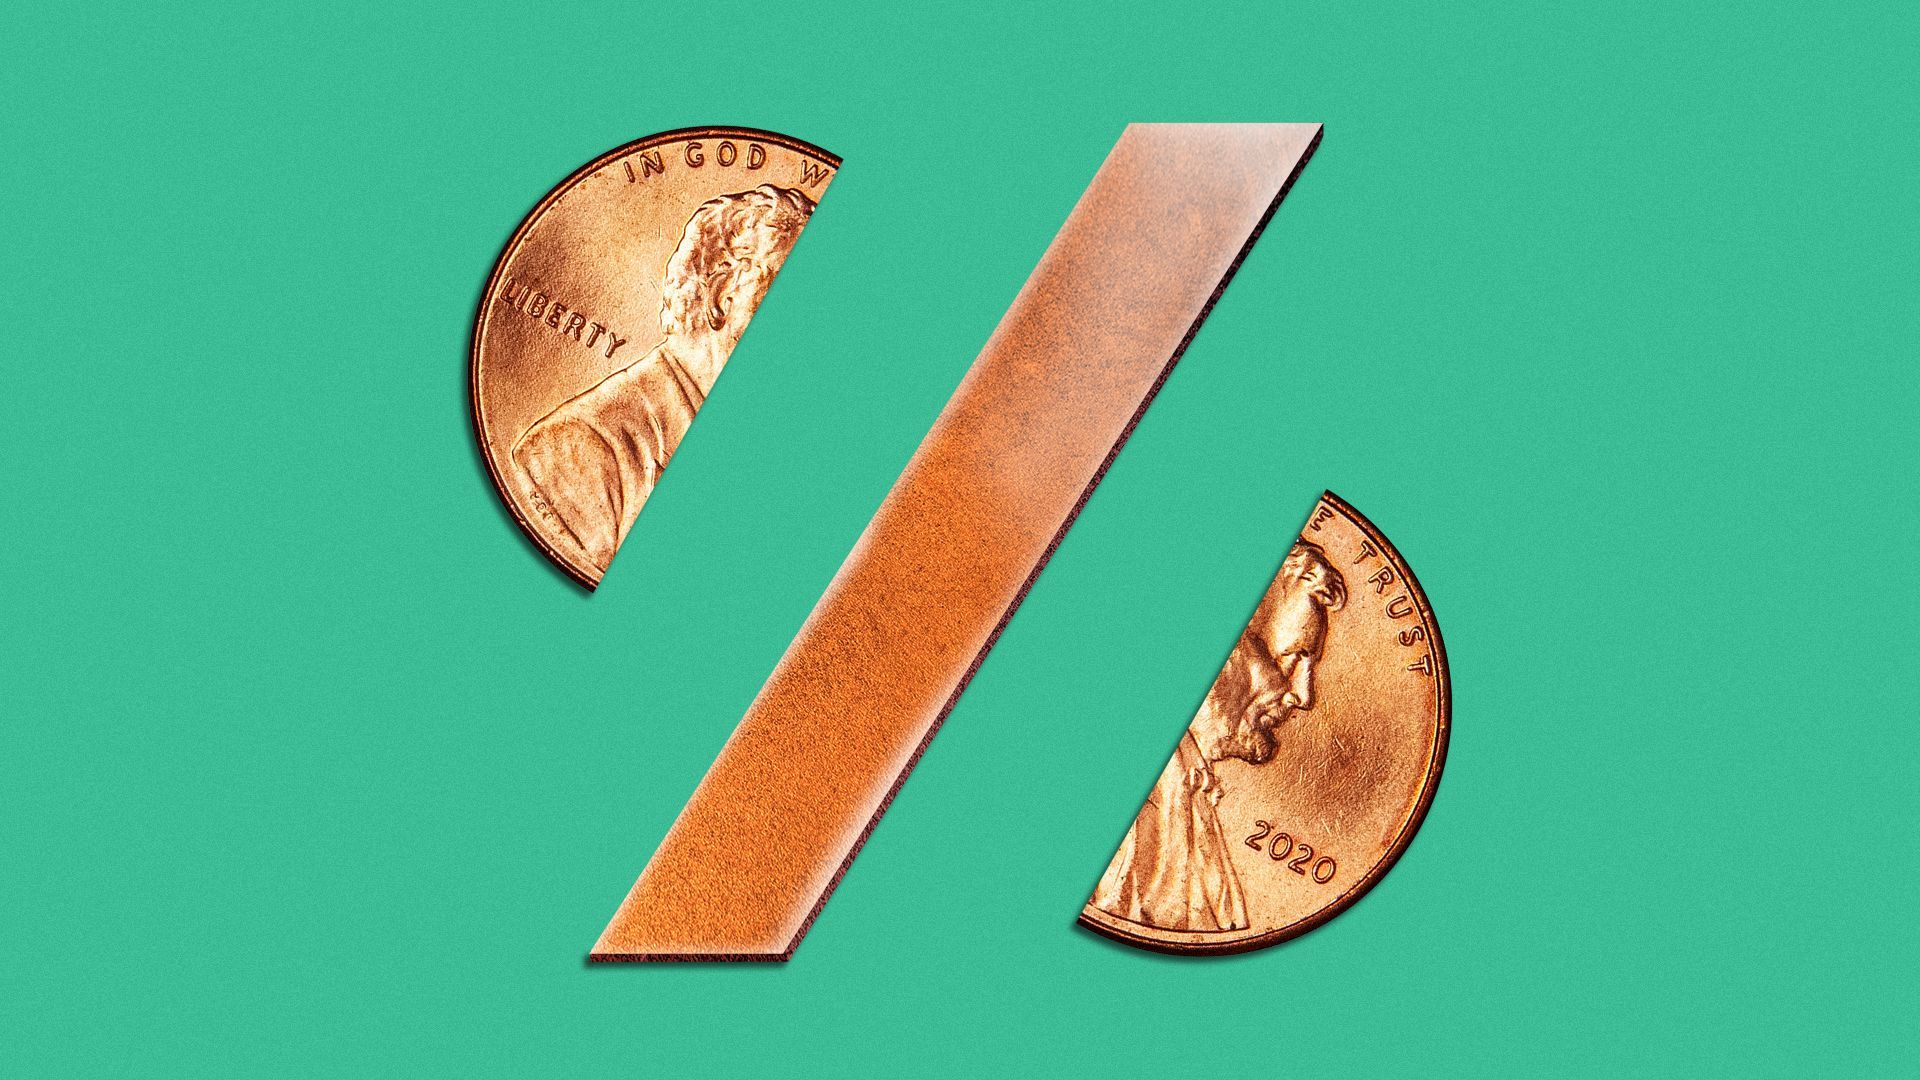 Illustration of a percentage sign made of two half pennies.